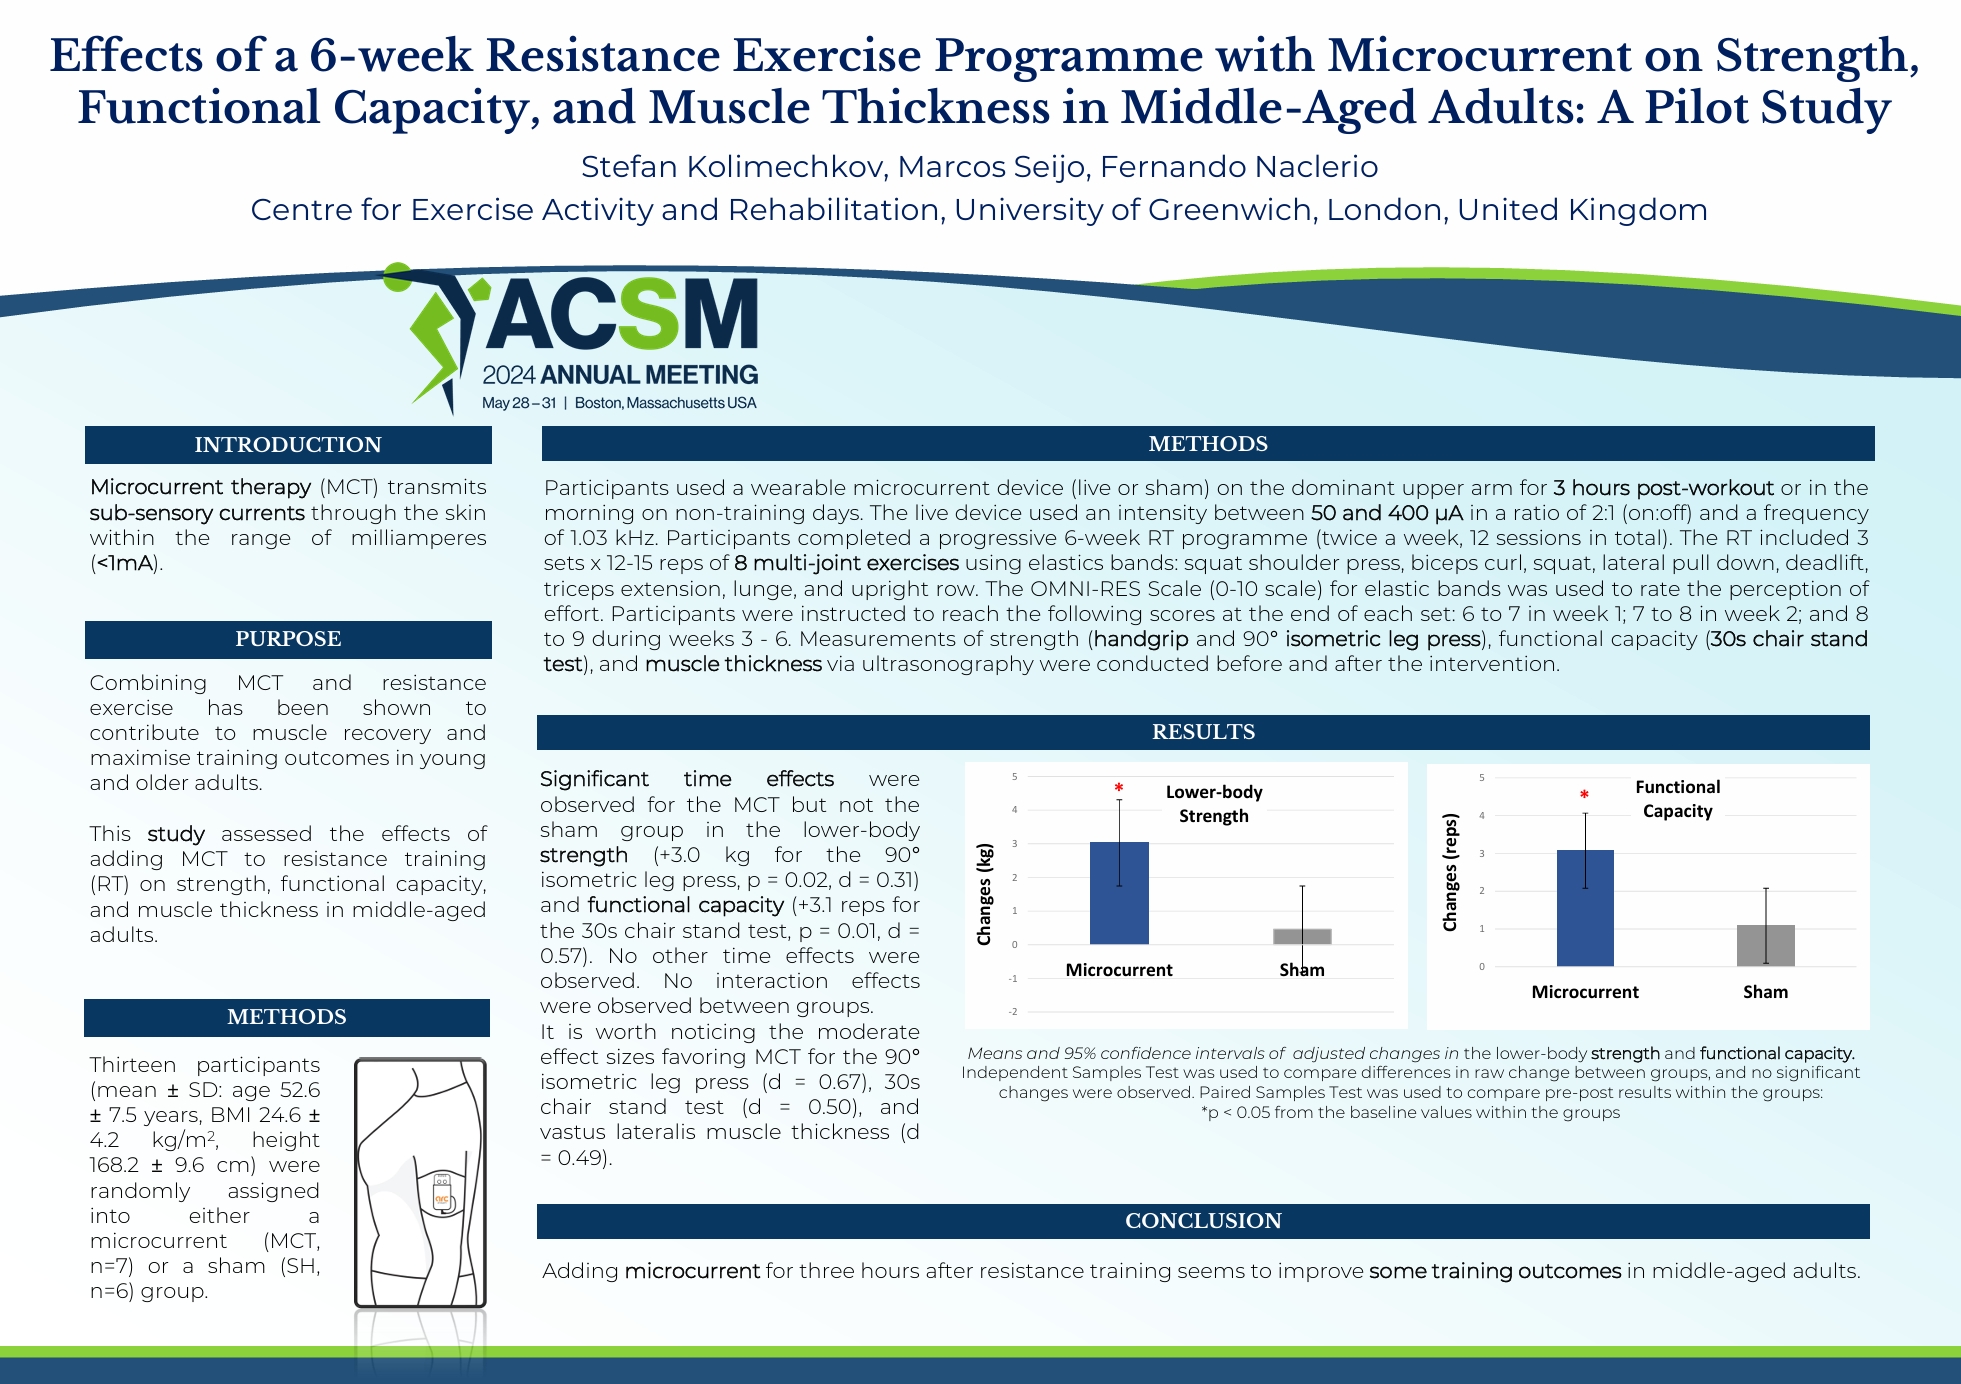 Effects of a 6-week Resistance Exercise Programme with Microcurrent on Strength, Functional Capacity, and Muscle Thickness in Middle-Aged Adults: A Pilot Study